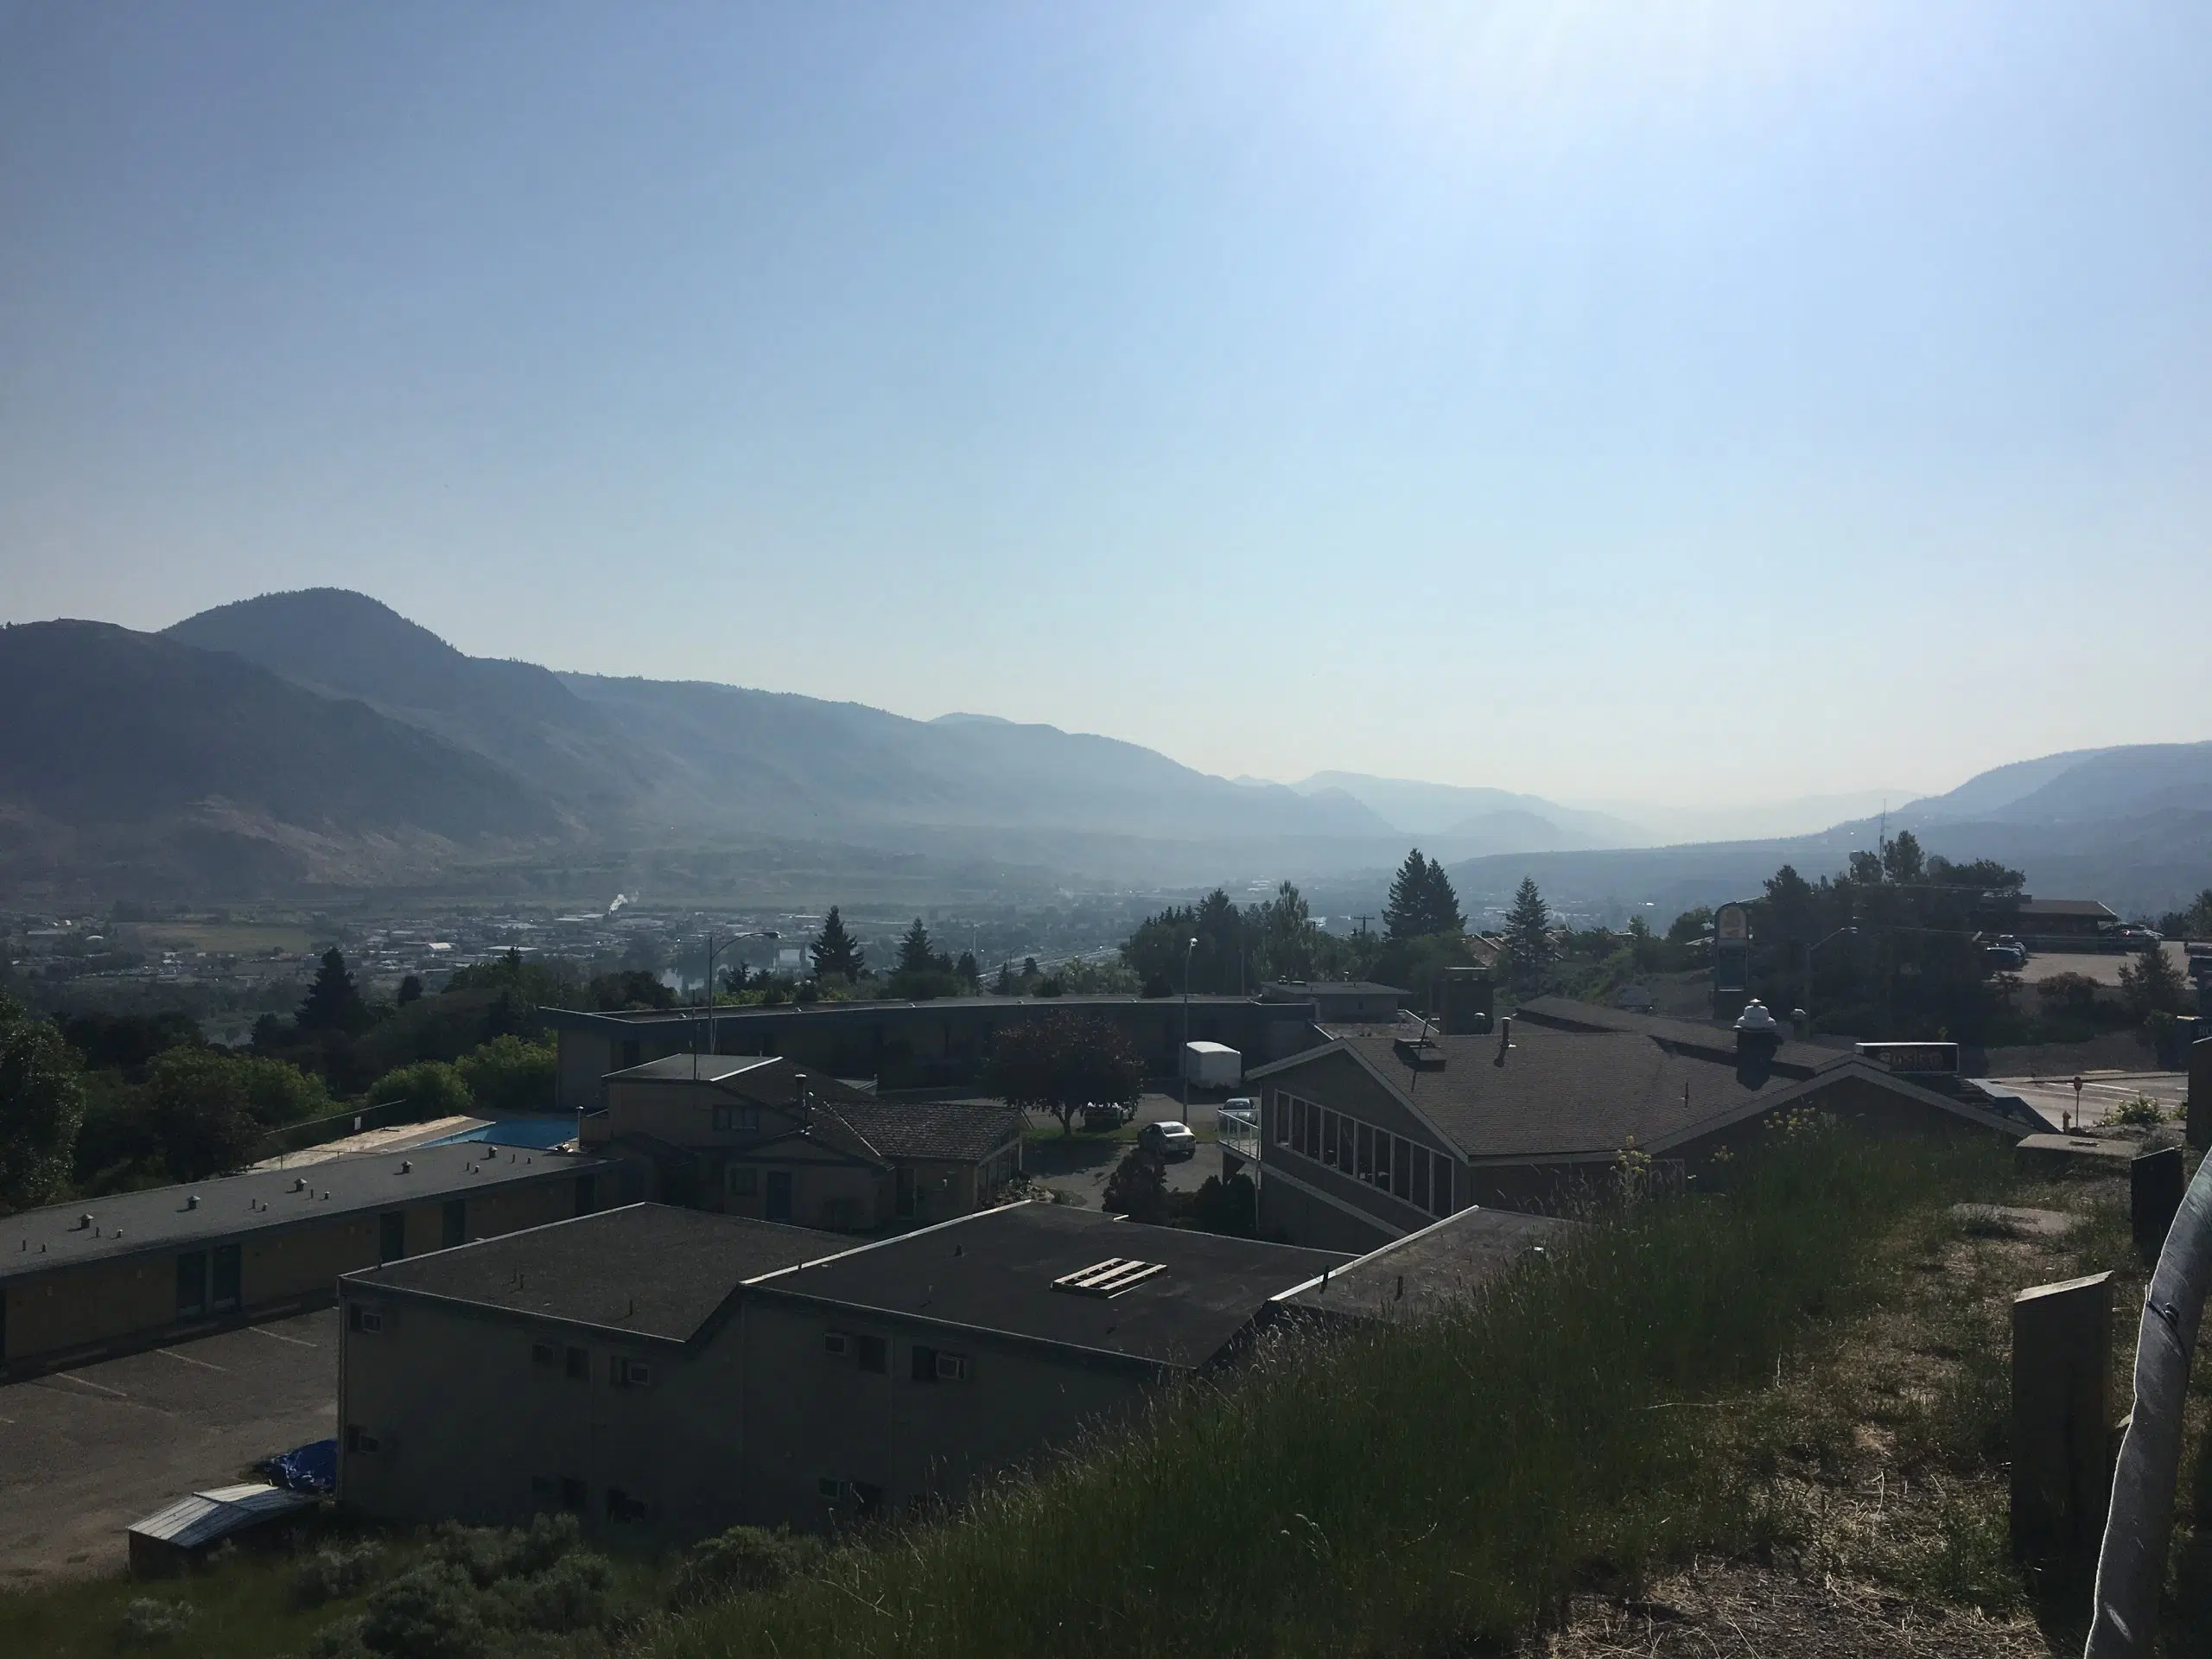 Kamloops sets record for hottest day in city's history Sunday; Lytton reaches warmest Canadian temperature ever